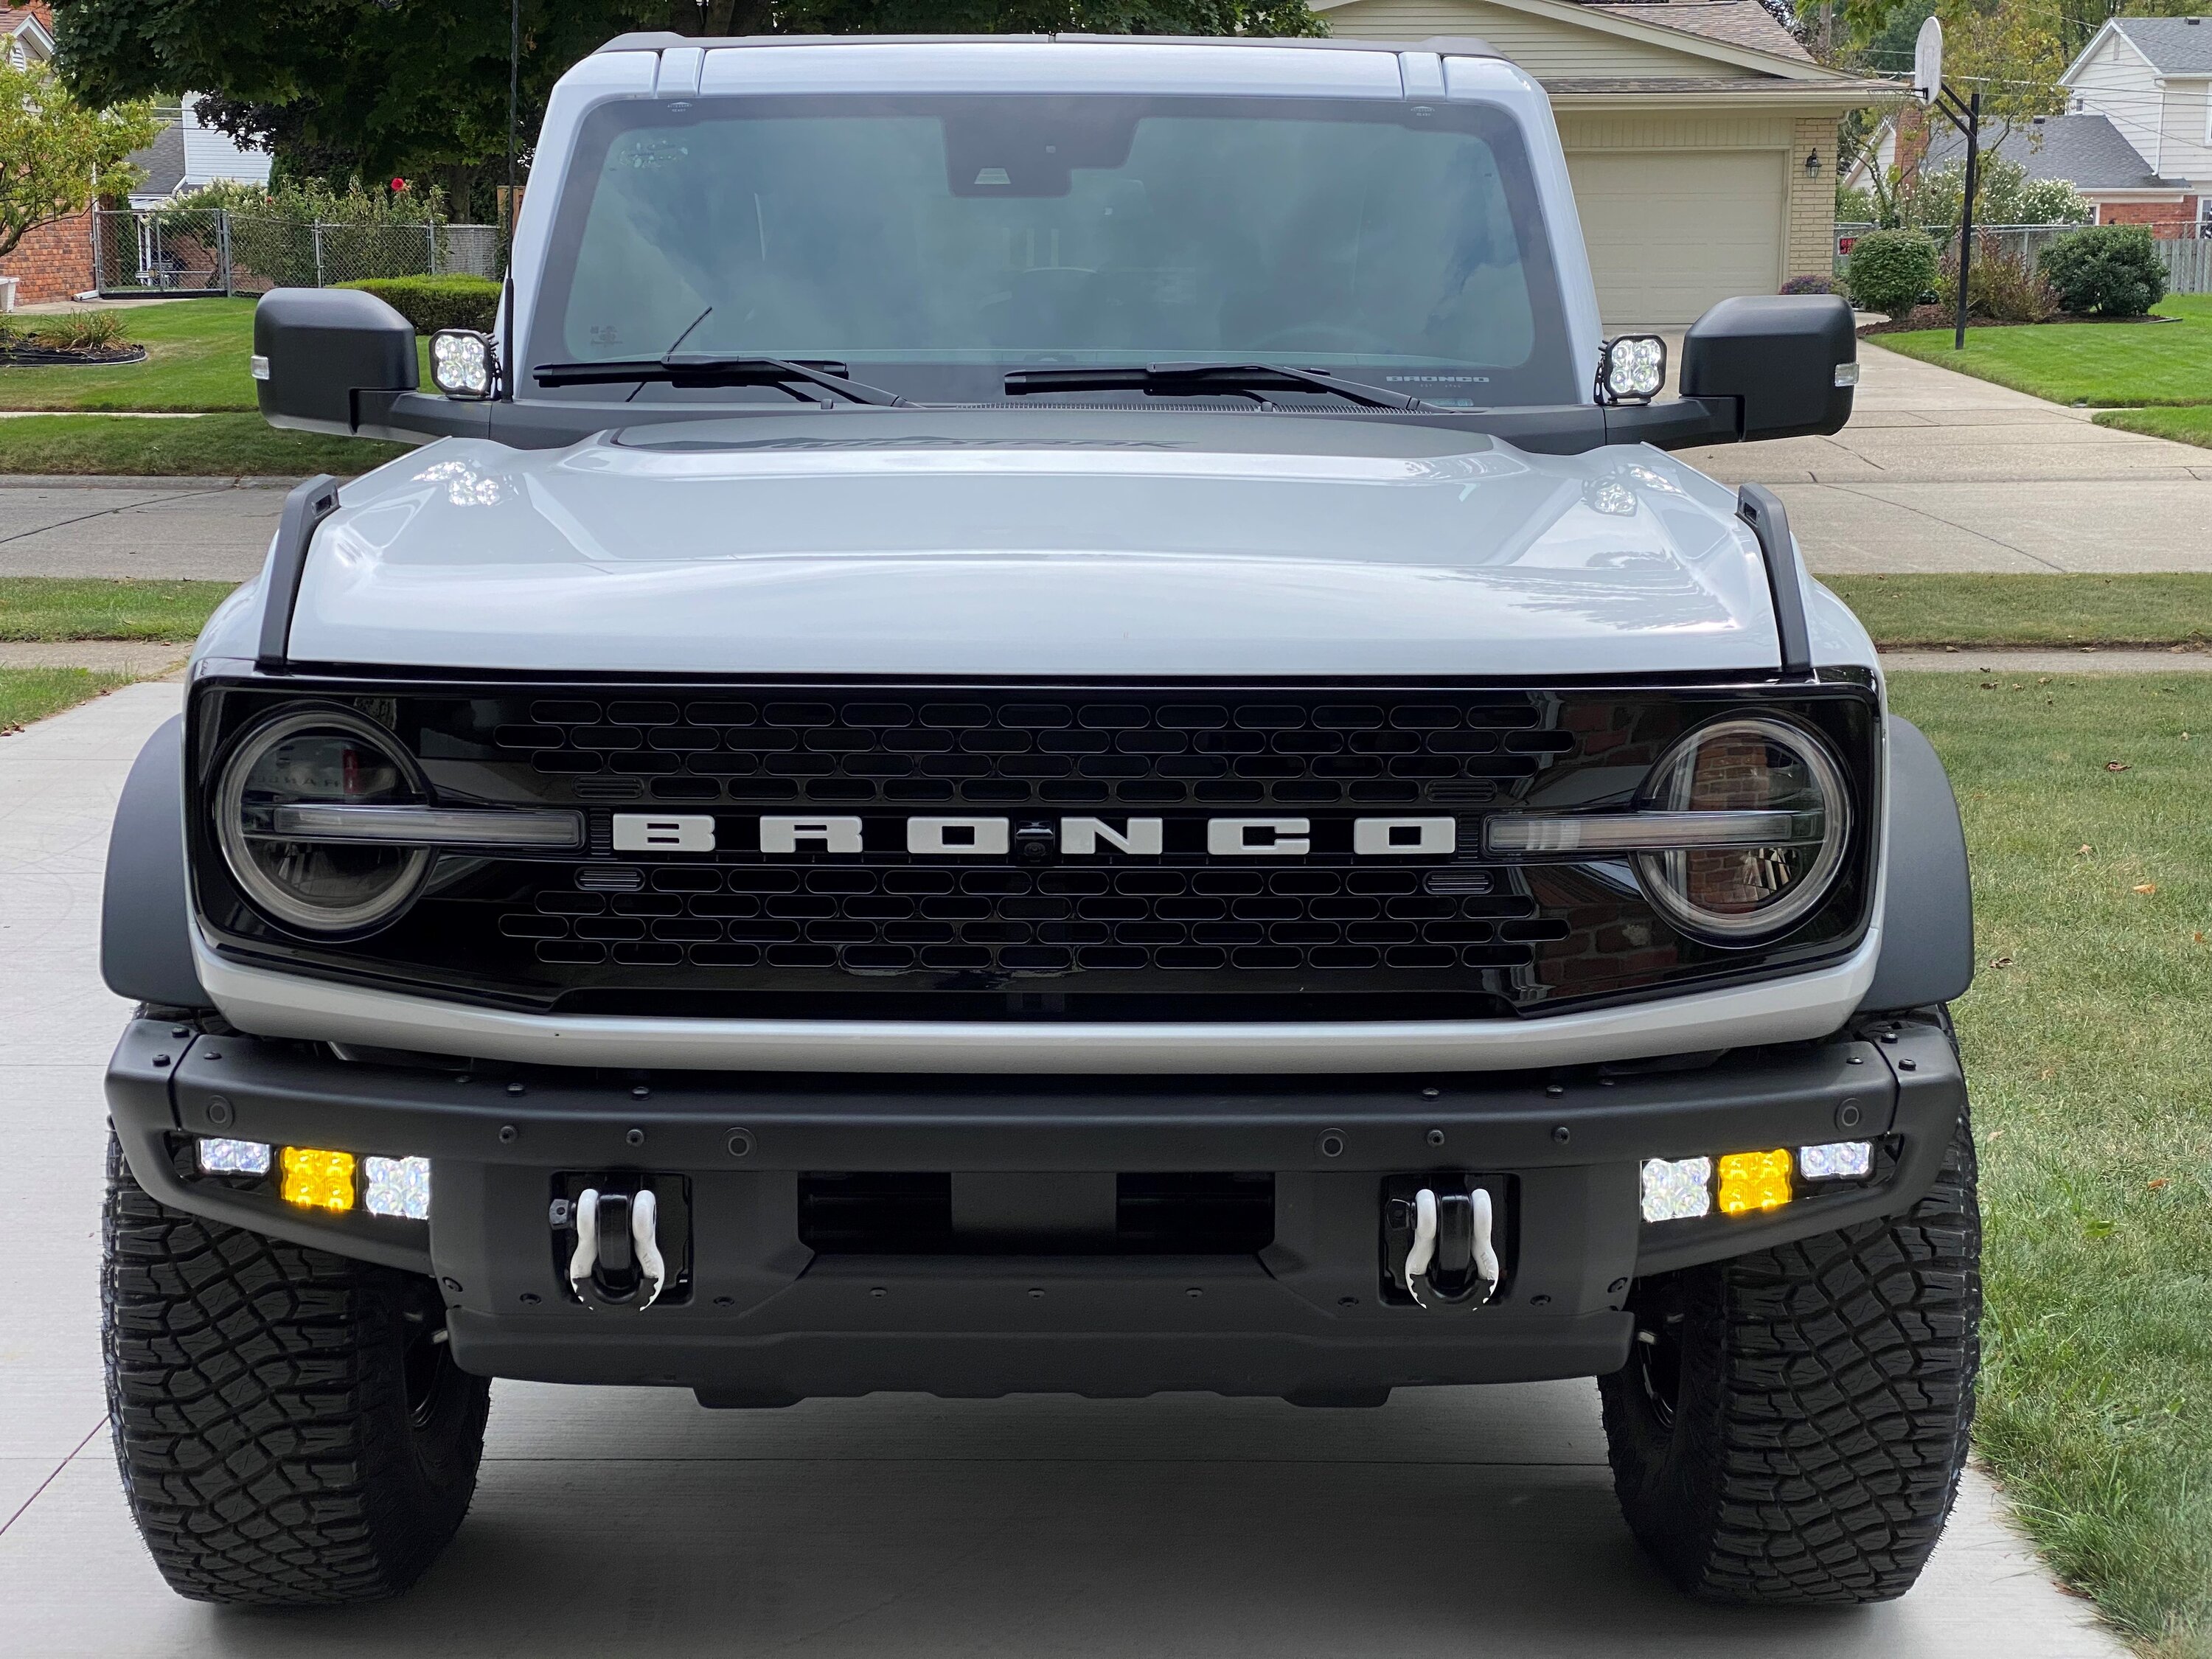 Ford Bronco LABOR DAY SALES (2022) | Save Big at 4x4TruckLEDs.com on LED Lighting & Accessories Bronco lights